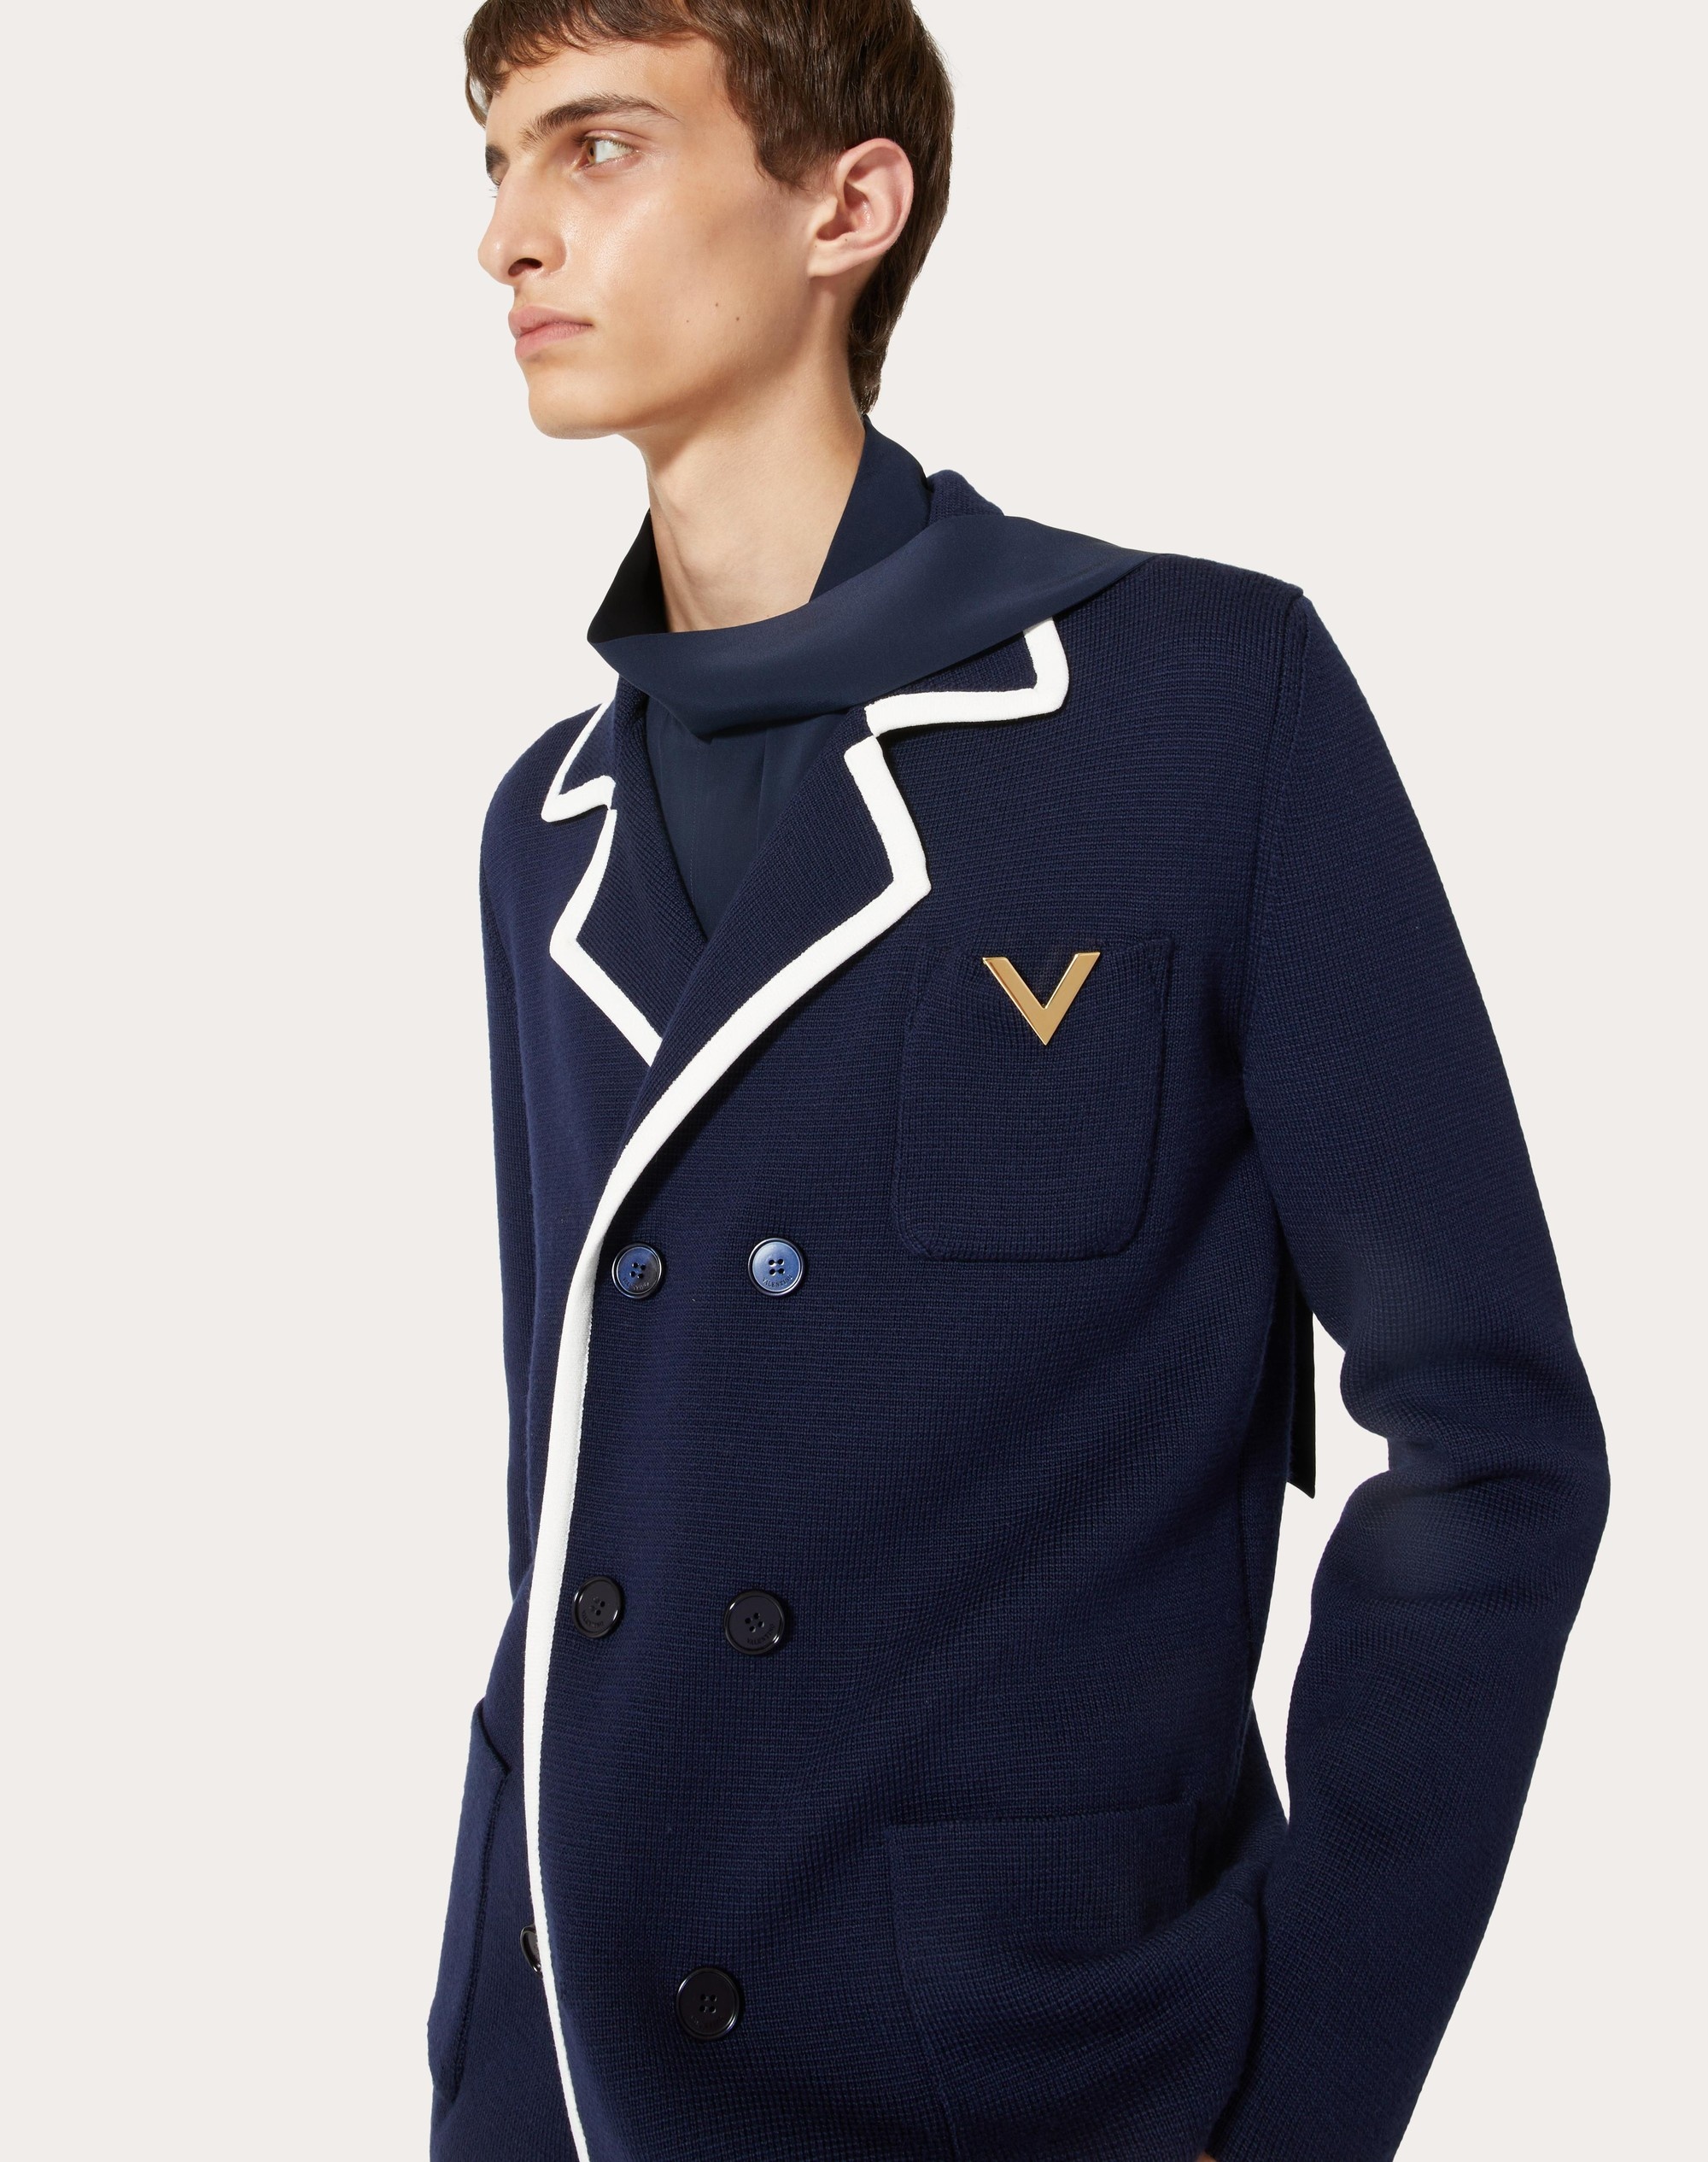 DOUBLE-BREASTED WOOL JACKET WITH METALLIC V DETAIL - 5